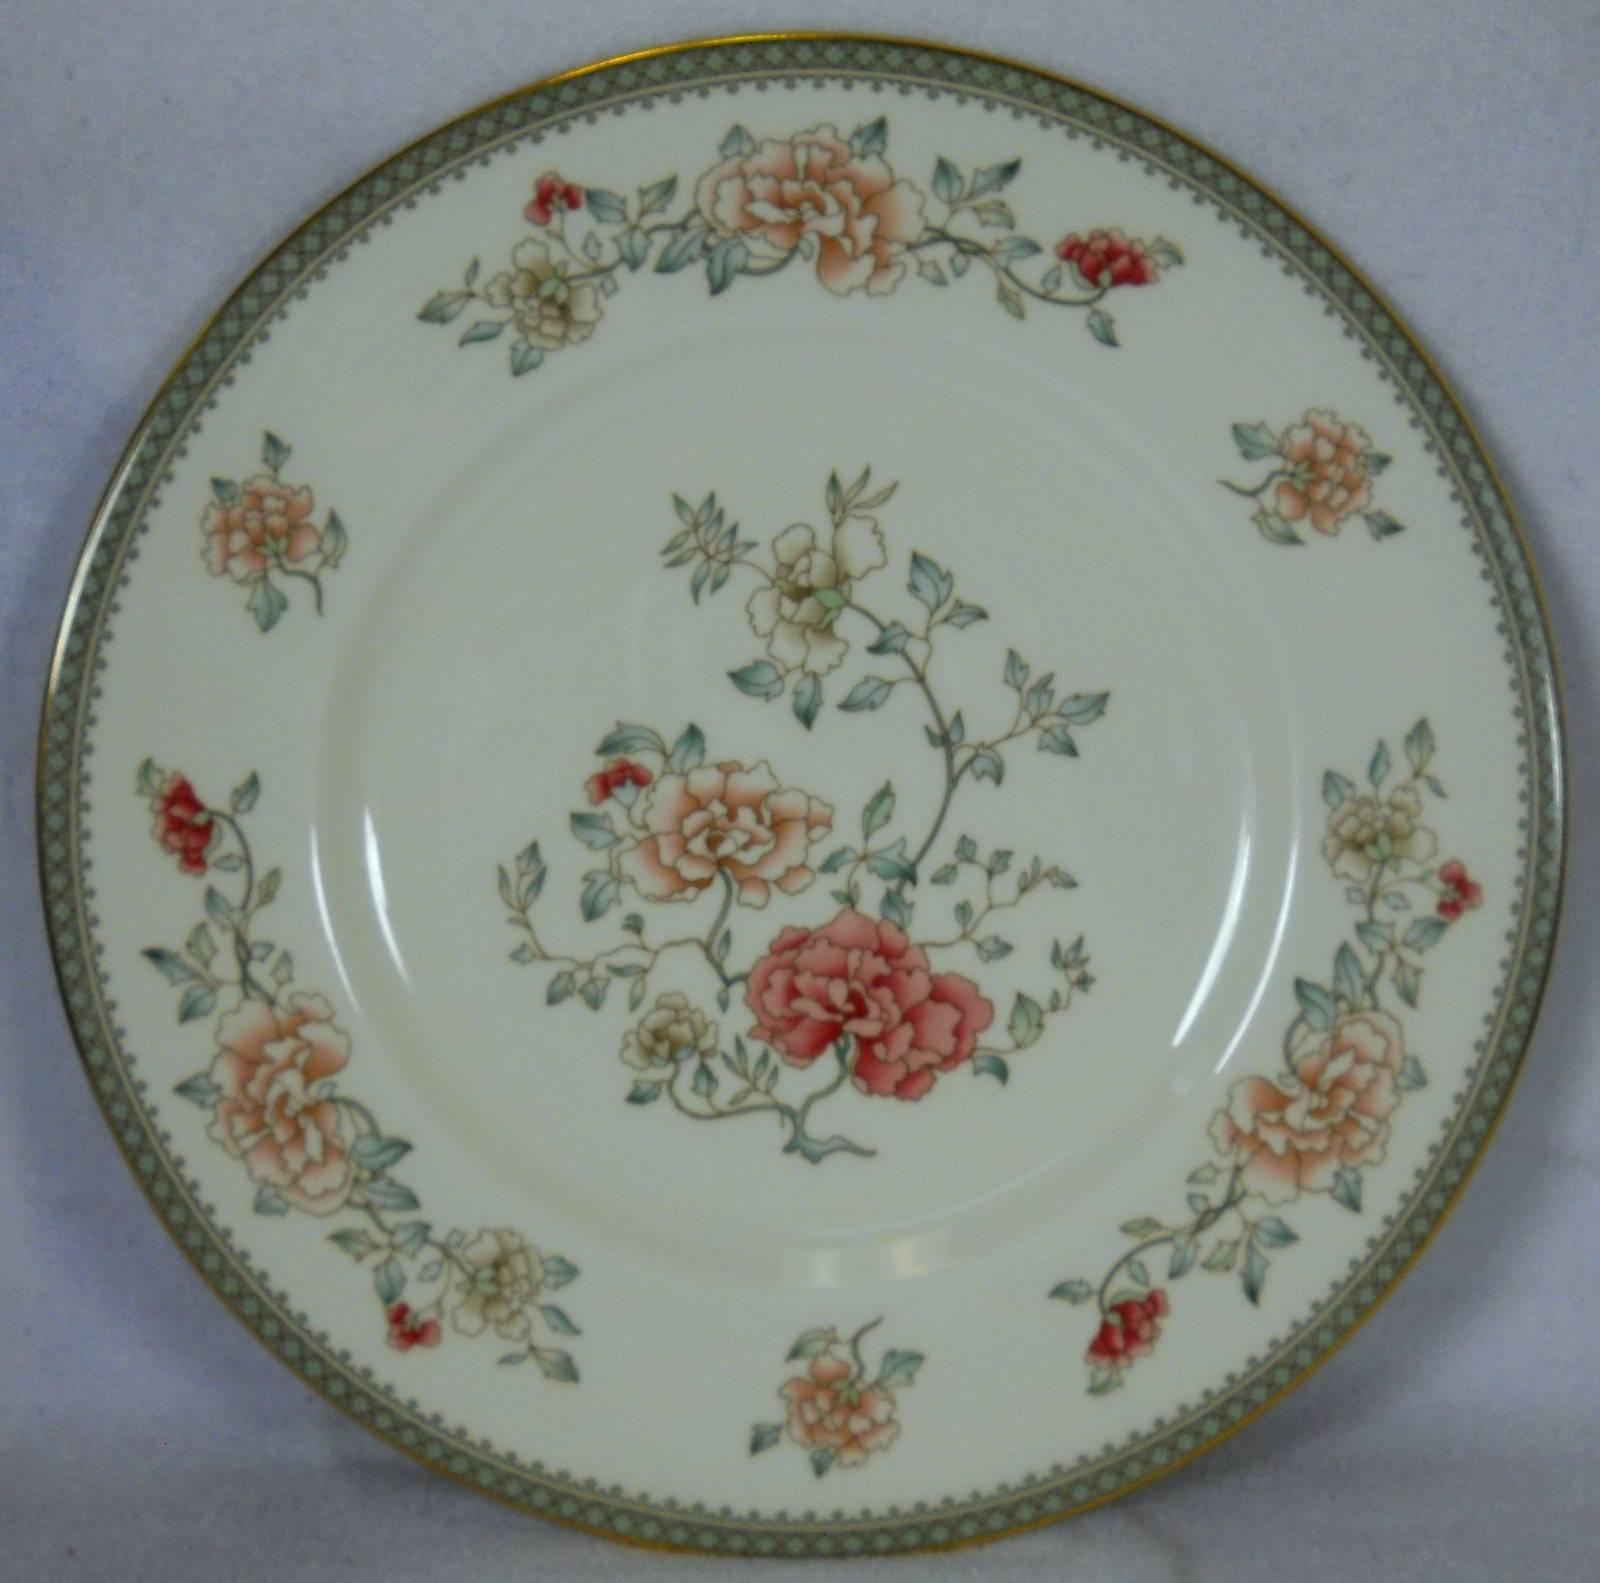 Minton England china Jasmine pattern 60-piece set service for 12

in great condition free-from chips, cracks, crazing, breaks, stains, or discoloration and with only a minimum of use.

 • Peach and white flowers.

 • Green band.

 • Gold